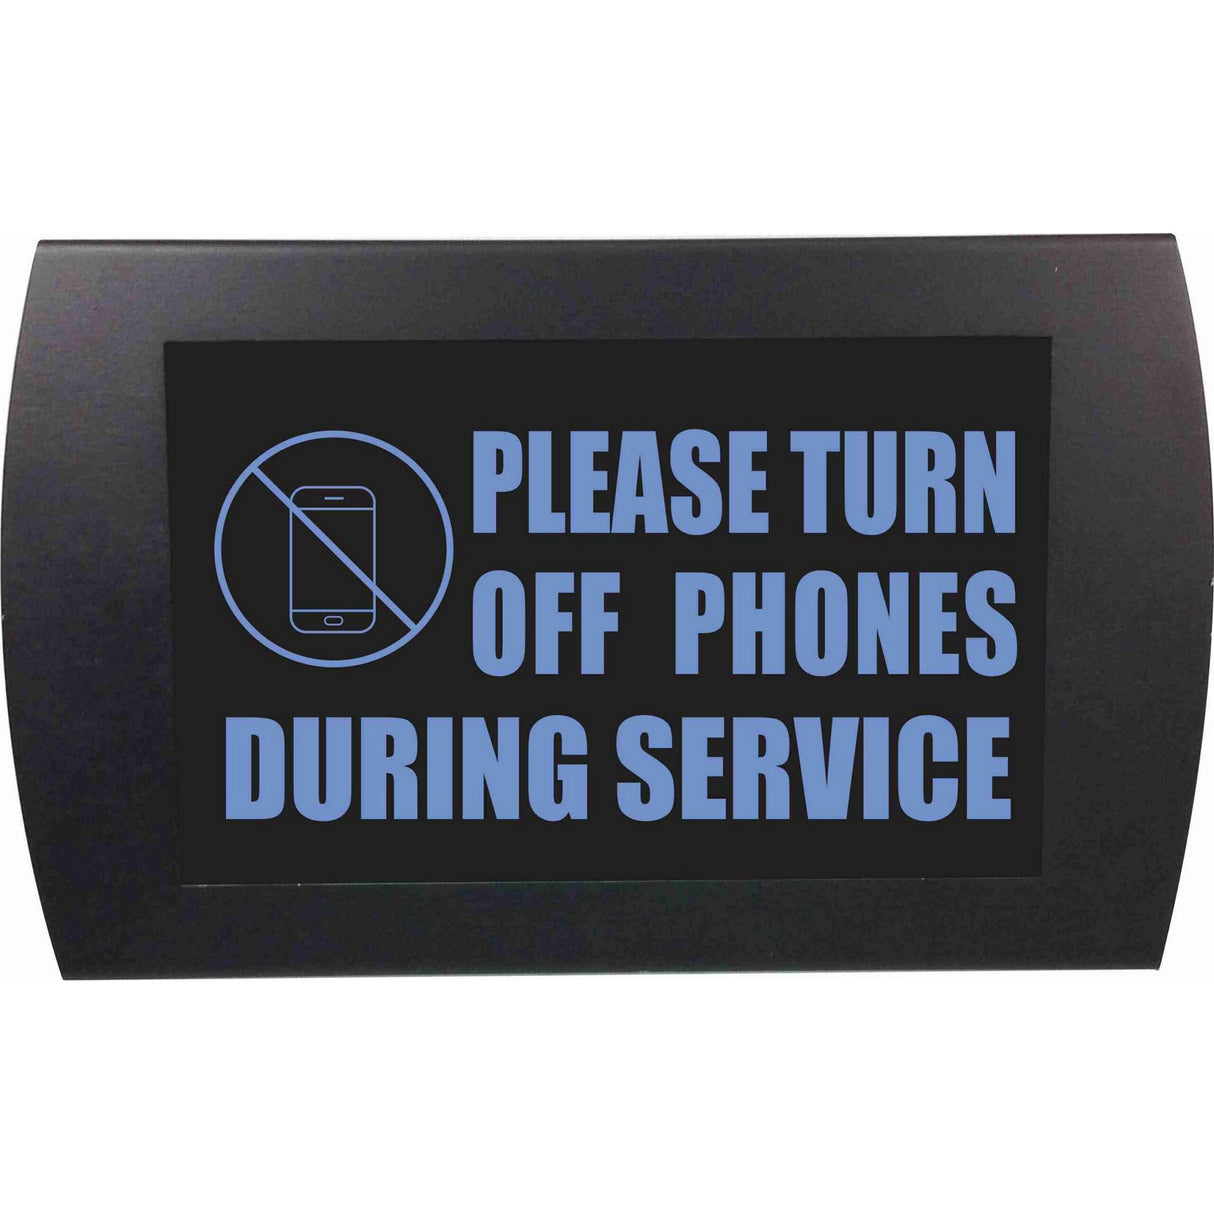 American Recorder OAS-2020M-BL "TURN OF PHONES DURING SERVICE" LED Lighted Sign, Blue